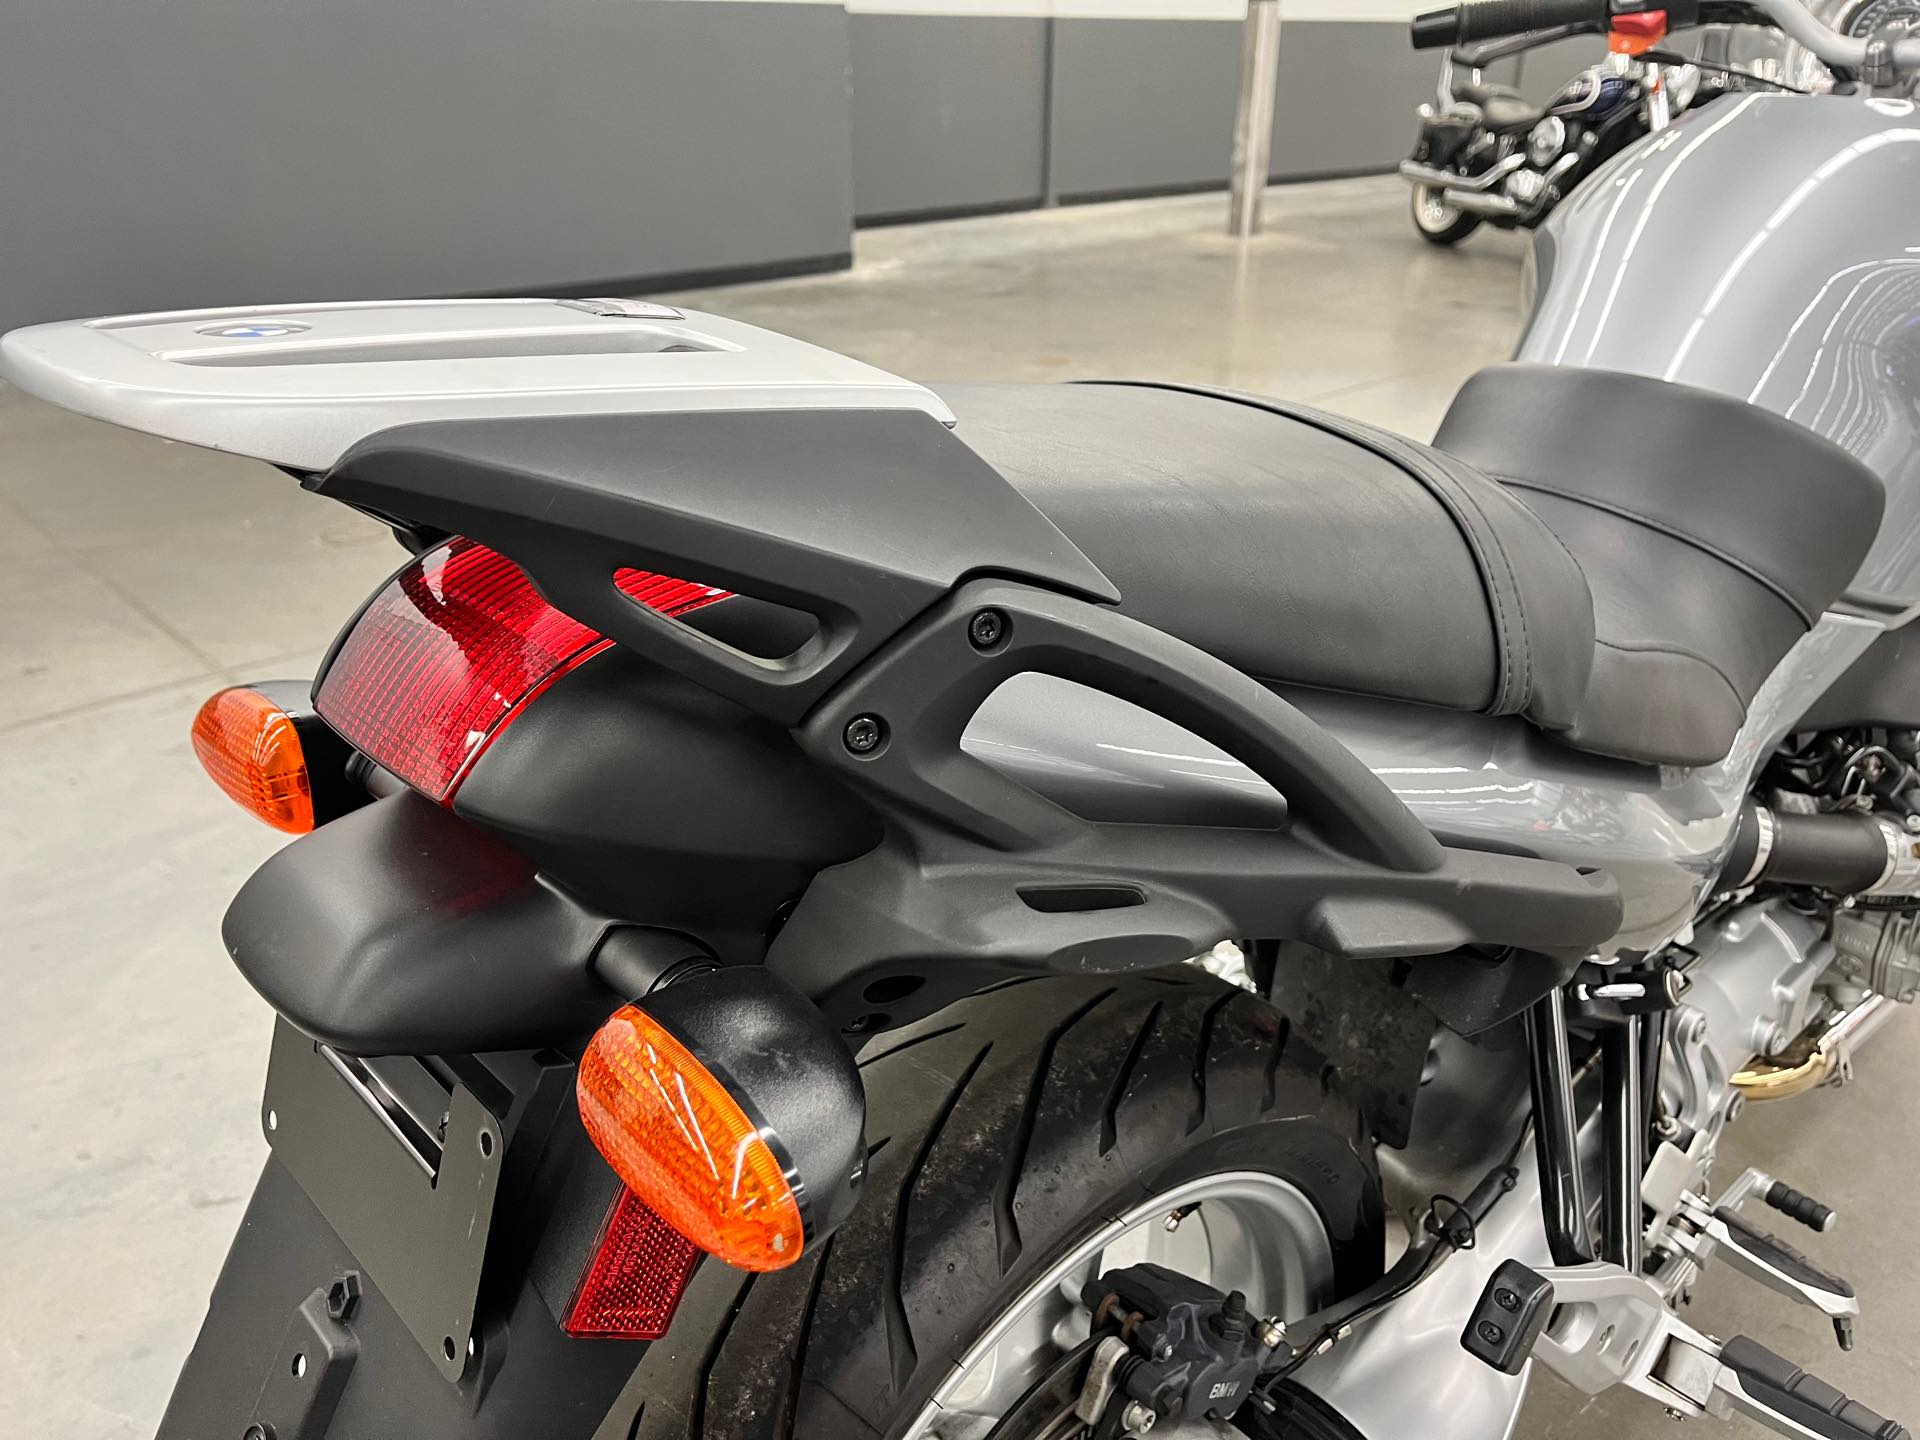 2005 BMW R 1150 R at Aces Motorcycles - Denver